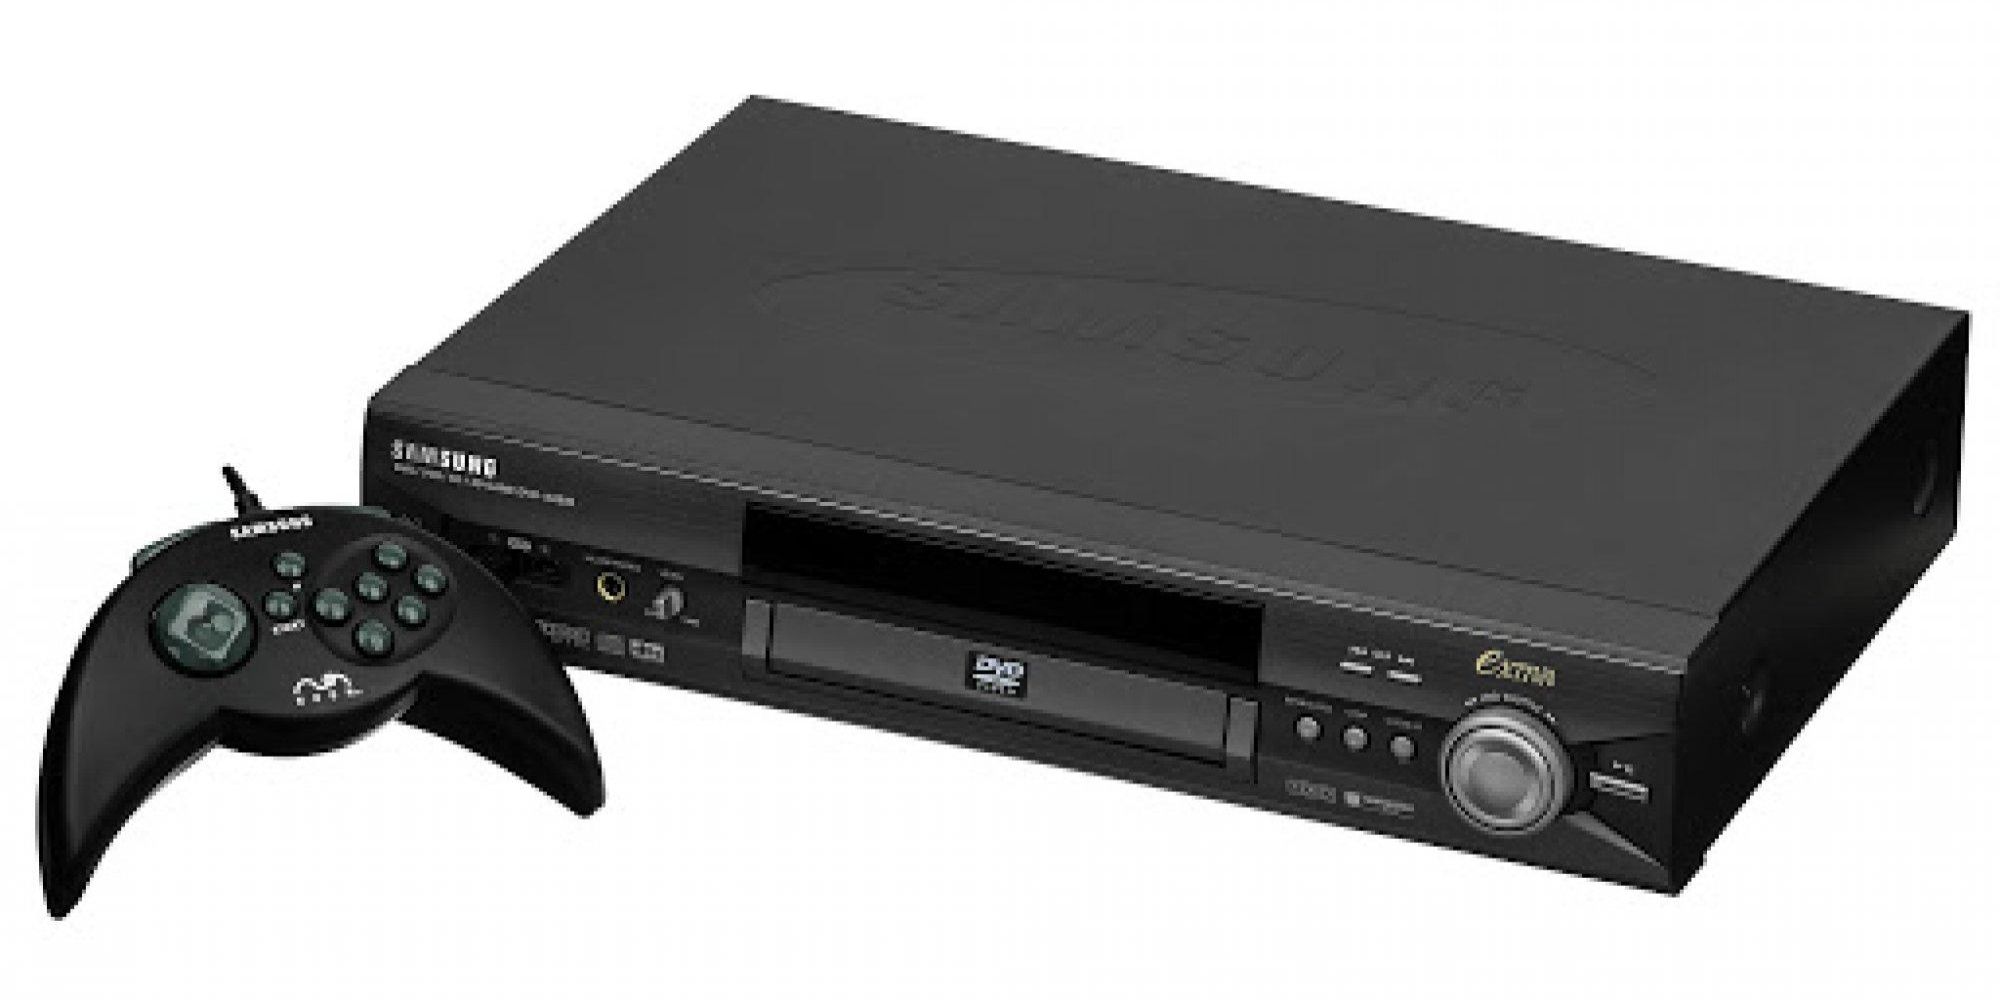 An image of the game system Nuon.